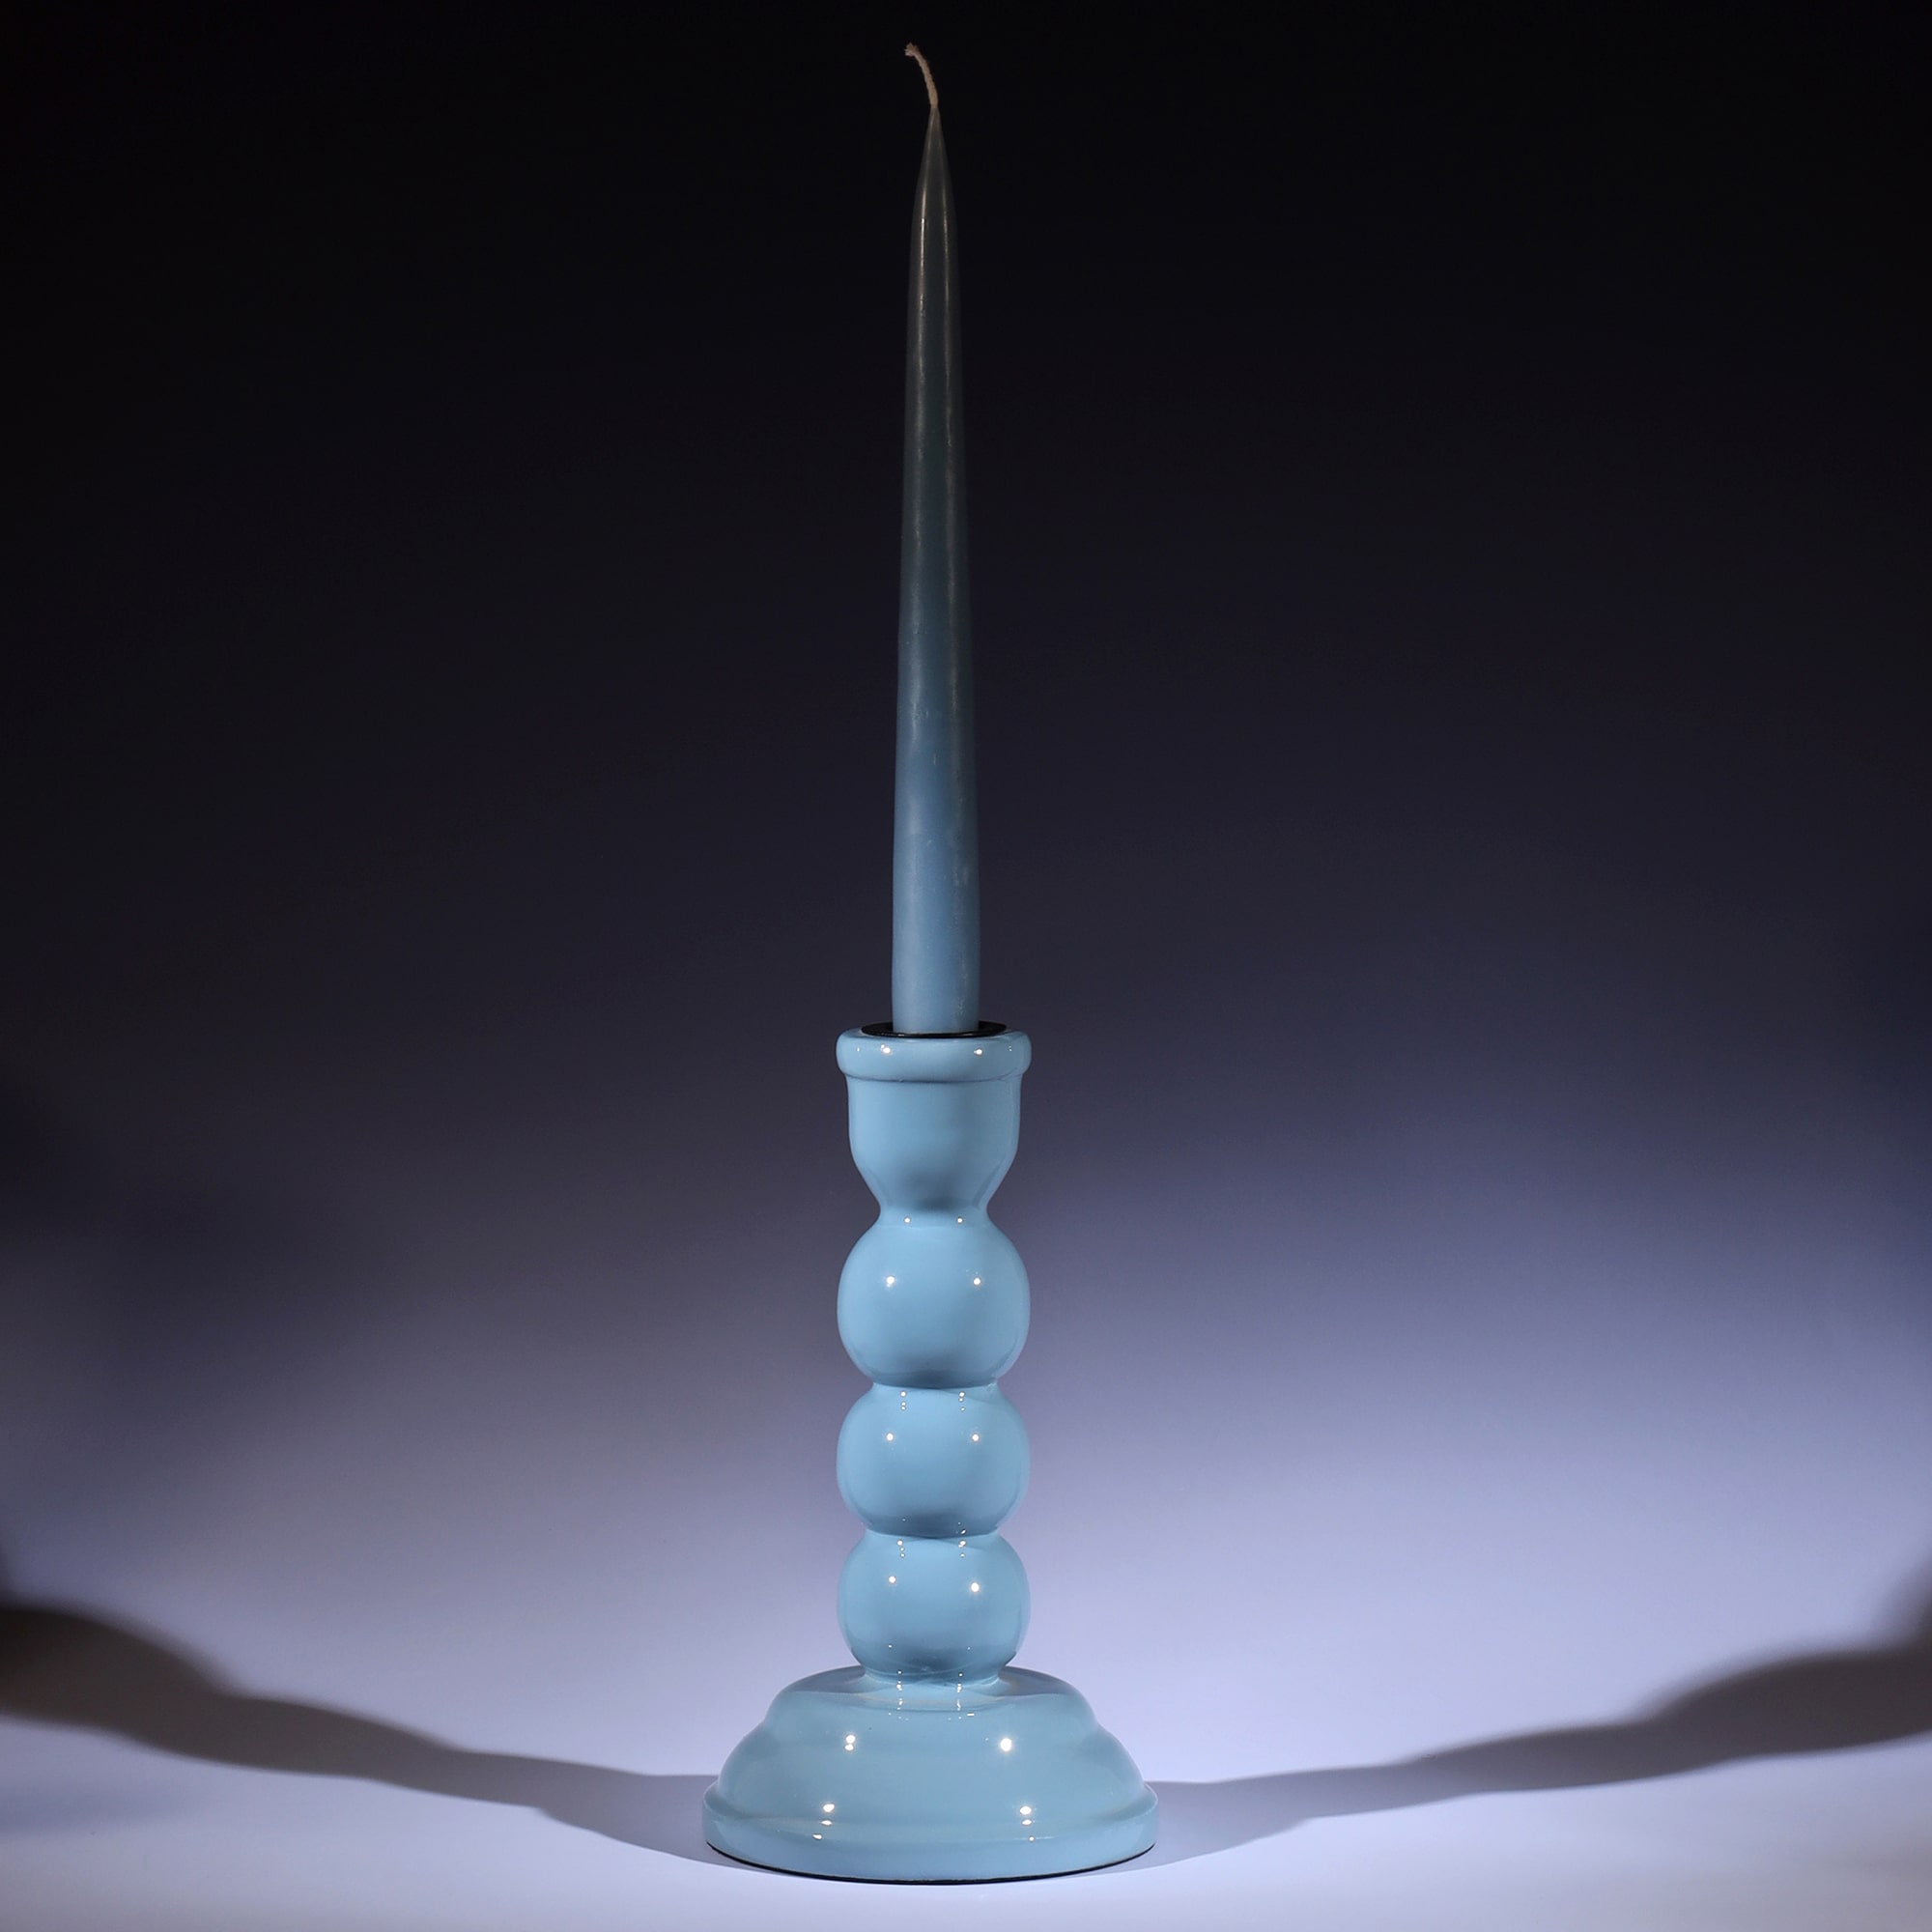 Powder Blue Polished Lacquer Candle holder with a matching candle